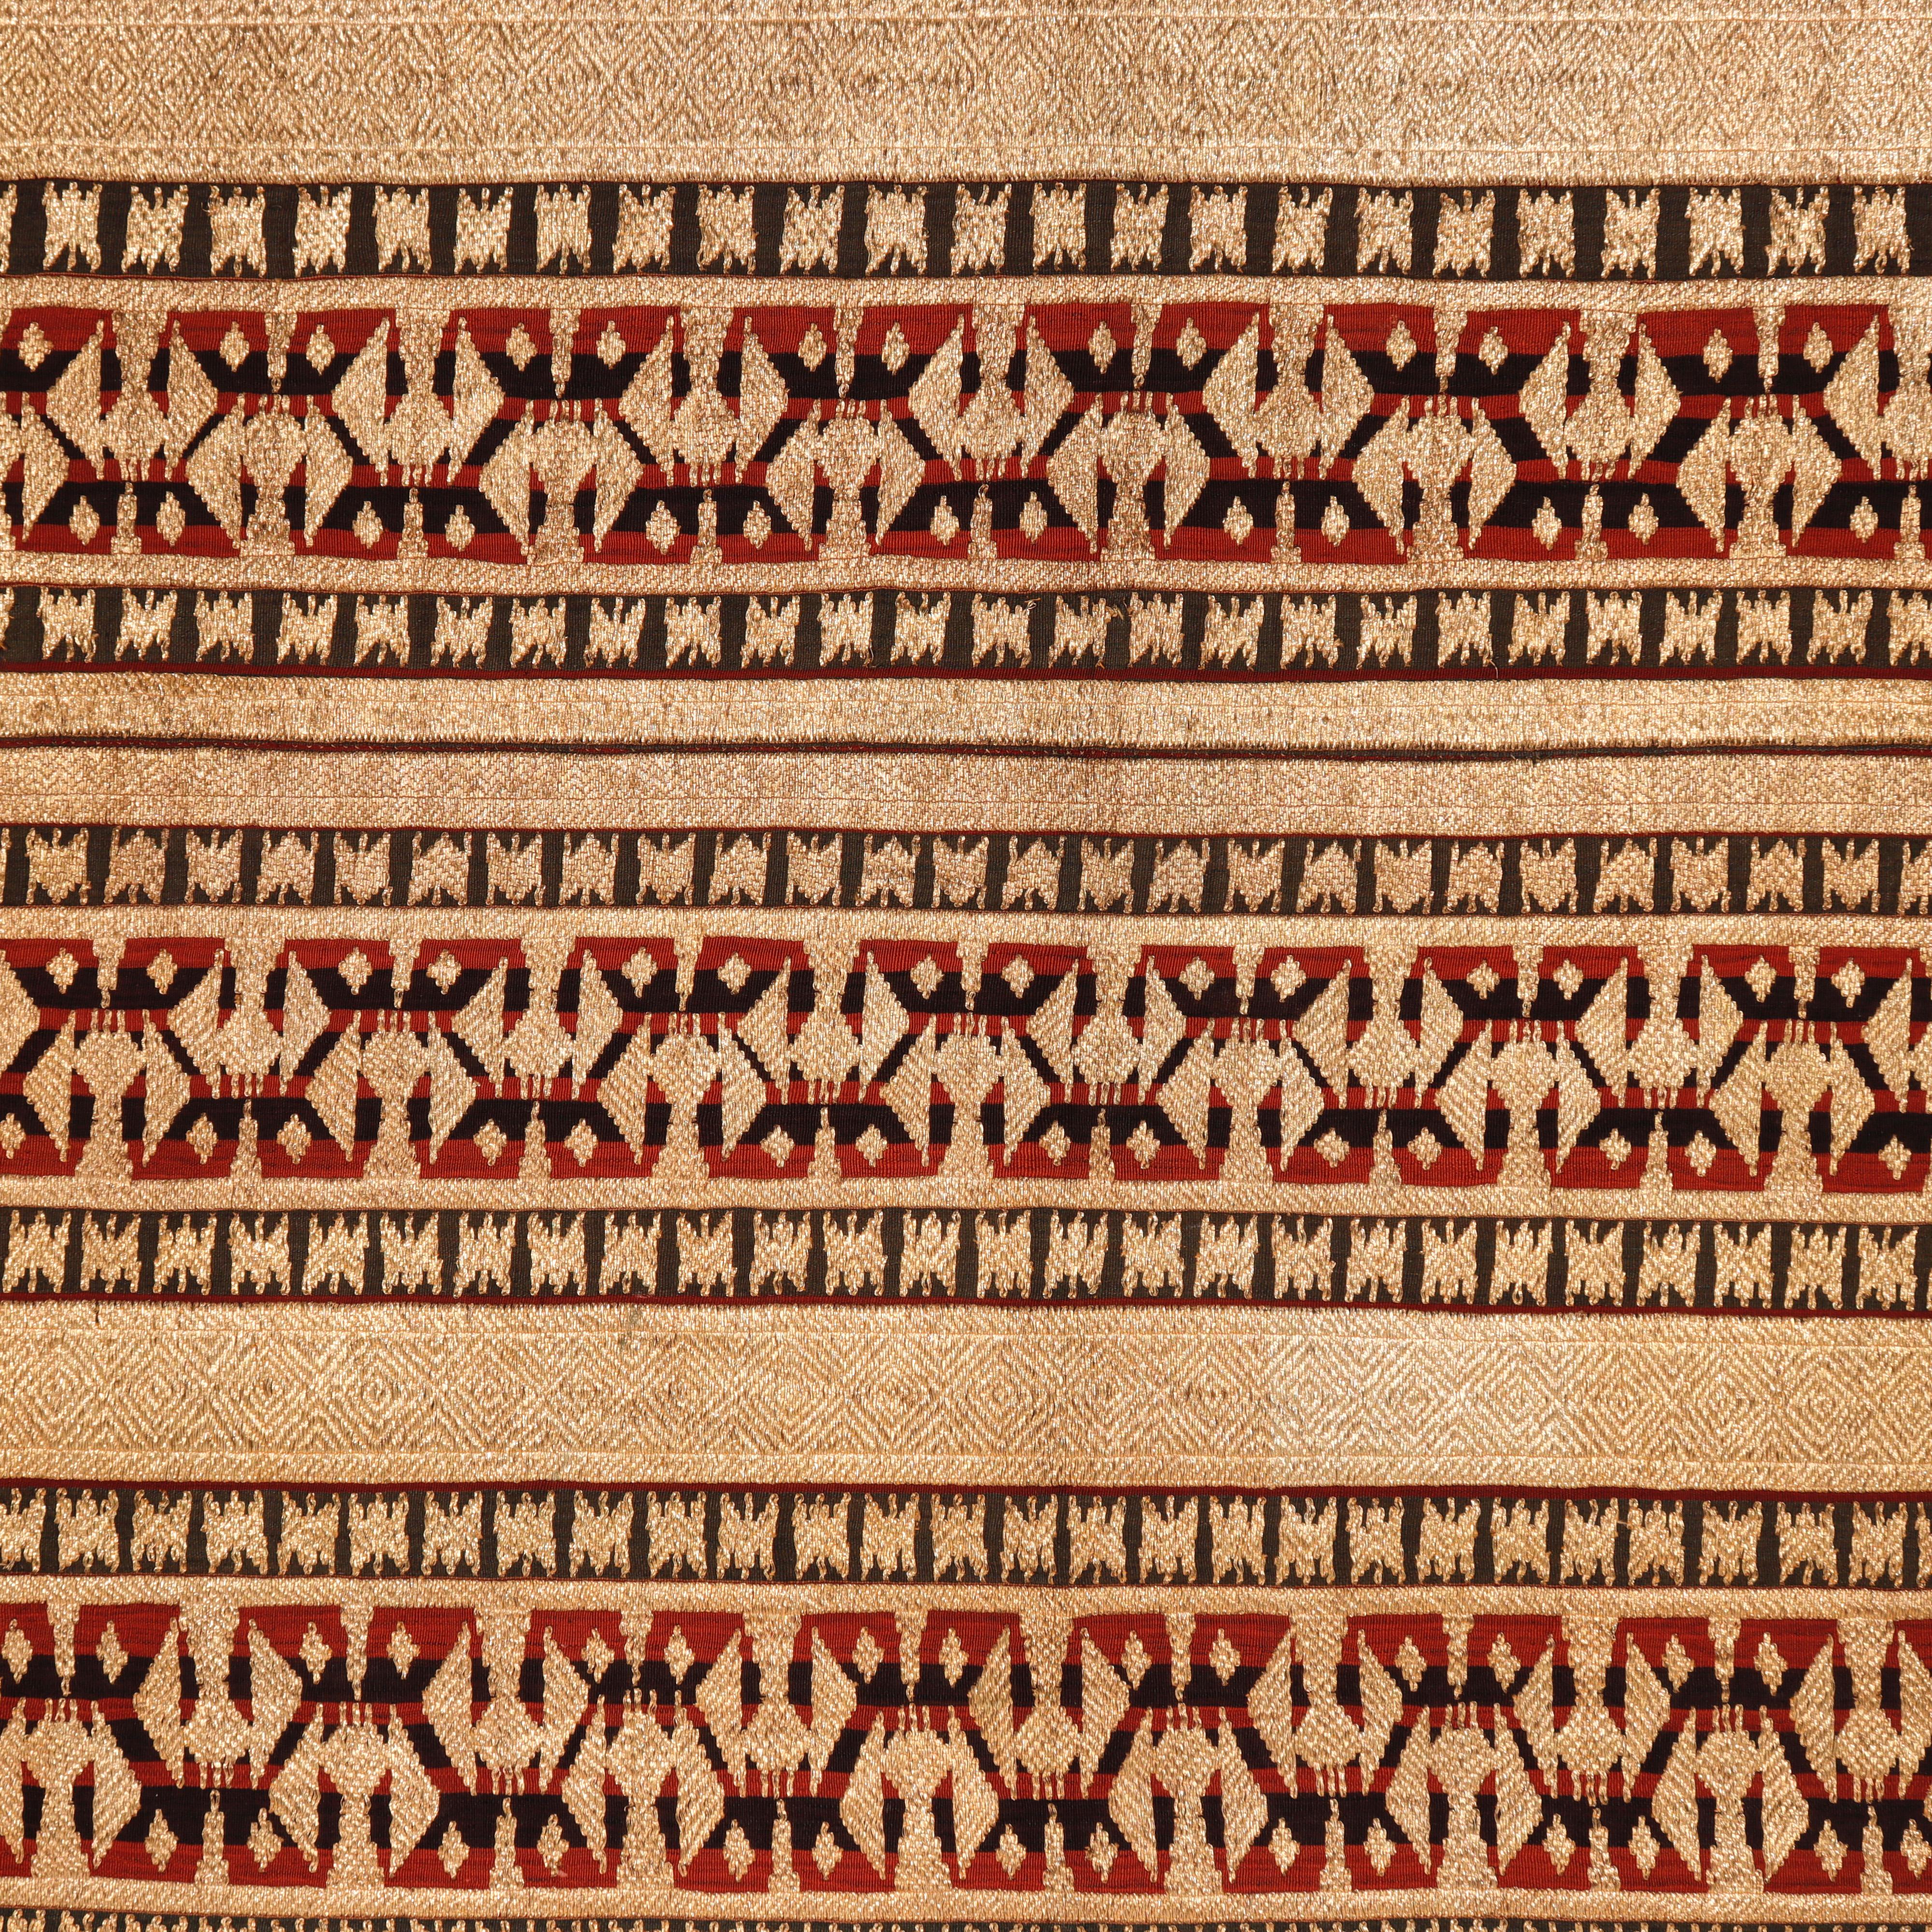 Antique Indonesian ceremonial skirt (Tapis) from the Abung people of Lampung, Sumatra with dense linear abstract design of gold wrapped thread couched down to the multicolored linear background. Skirt seam opened, minor signs of wear, otherwise fine